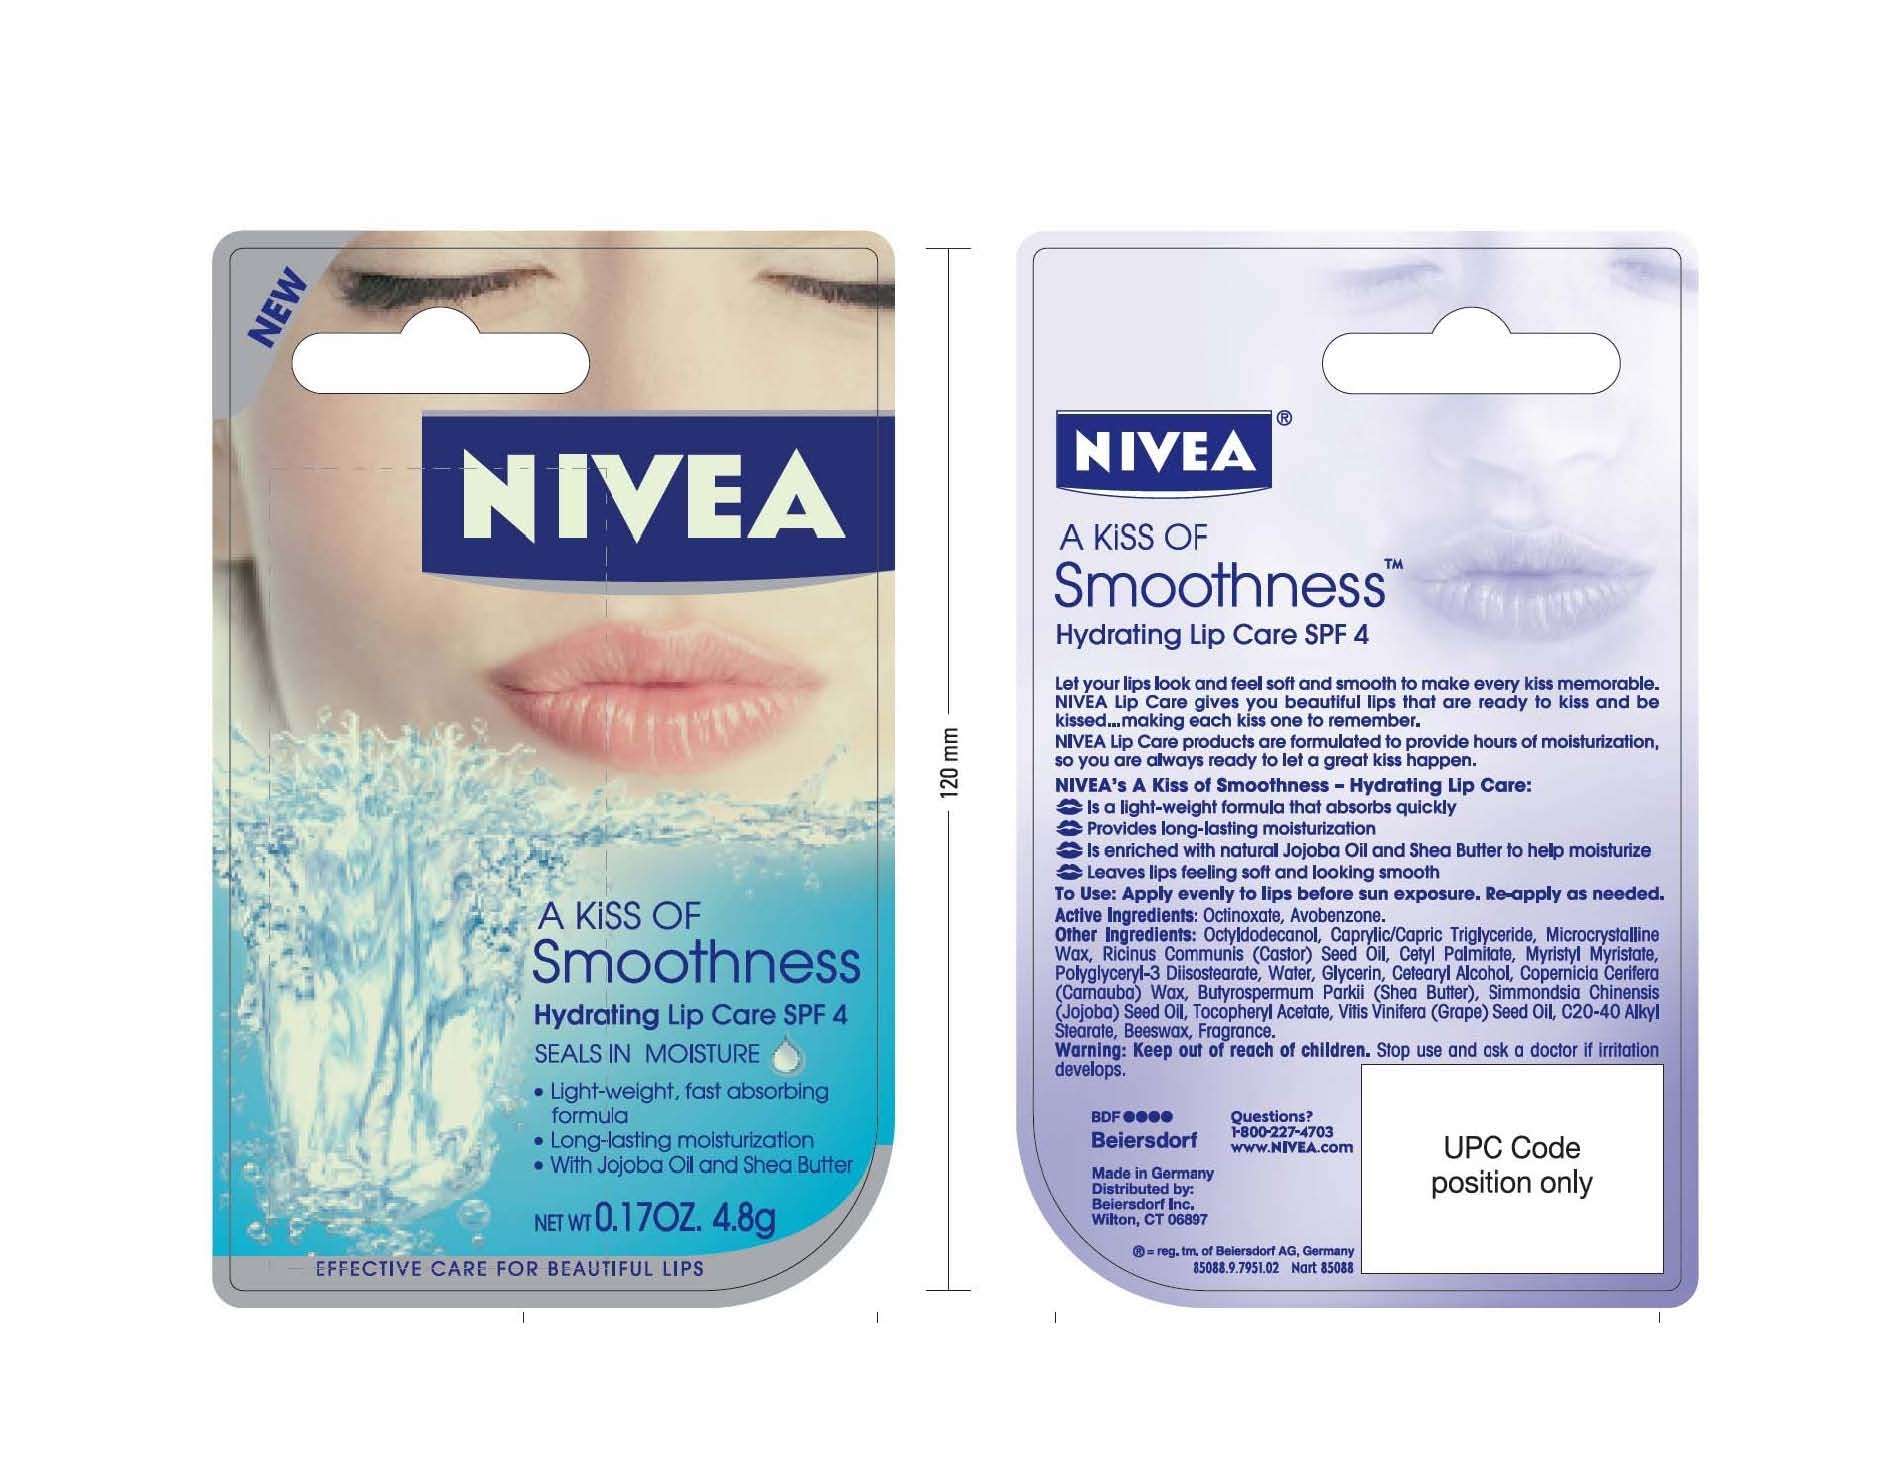 NIVEA A Kiss of Smoothness Hydrating Lip Care